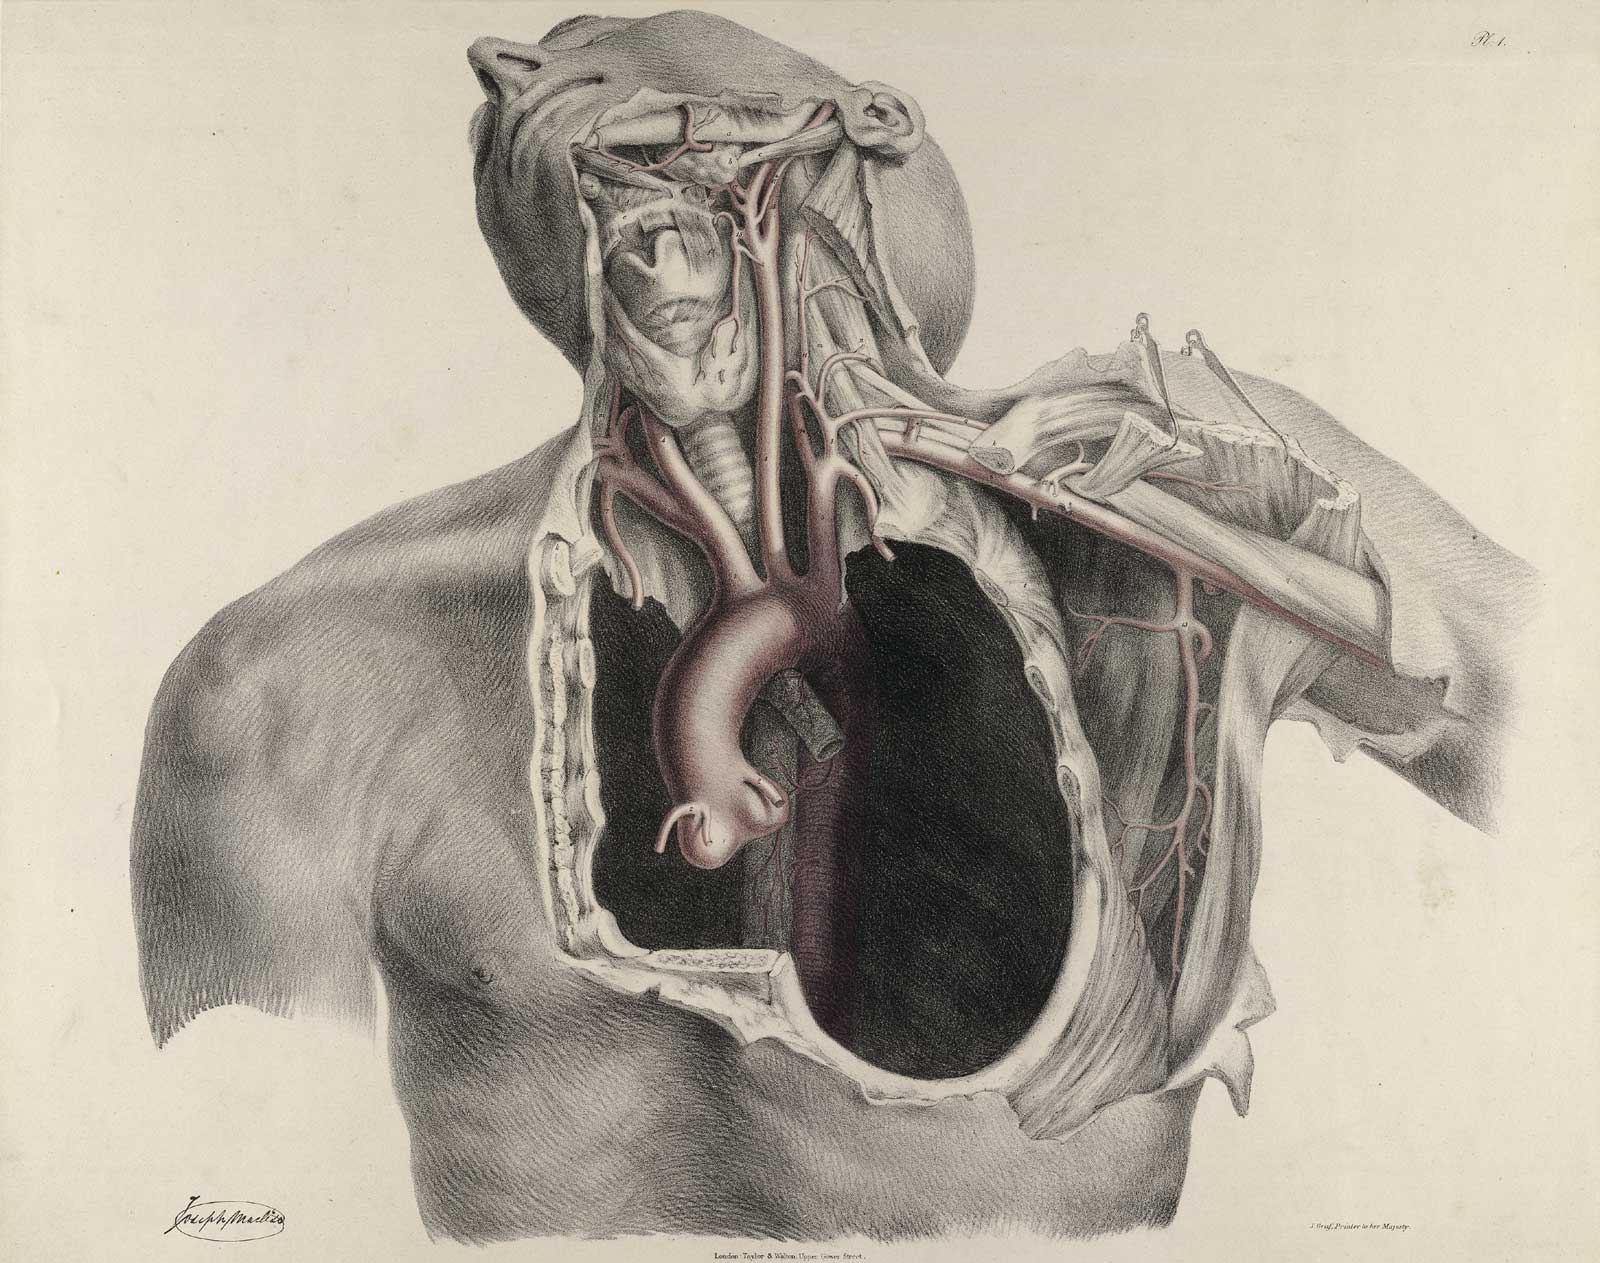 Plate 1 of Quain's The anatomy of the arteries of the human body, with its applications to pathology and operative surgery, featuring the upper body of a male corpse with the head tilted back to the right. The chest cavity has been removed to show the vascular system leading to the head.